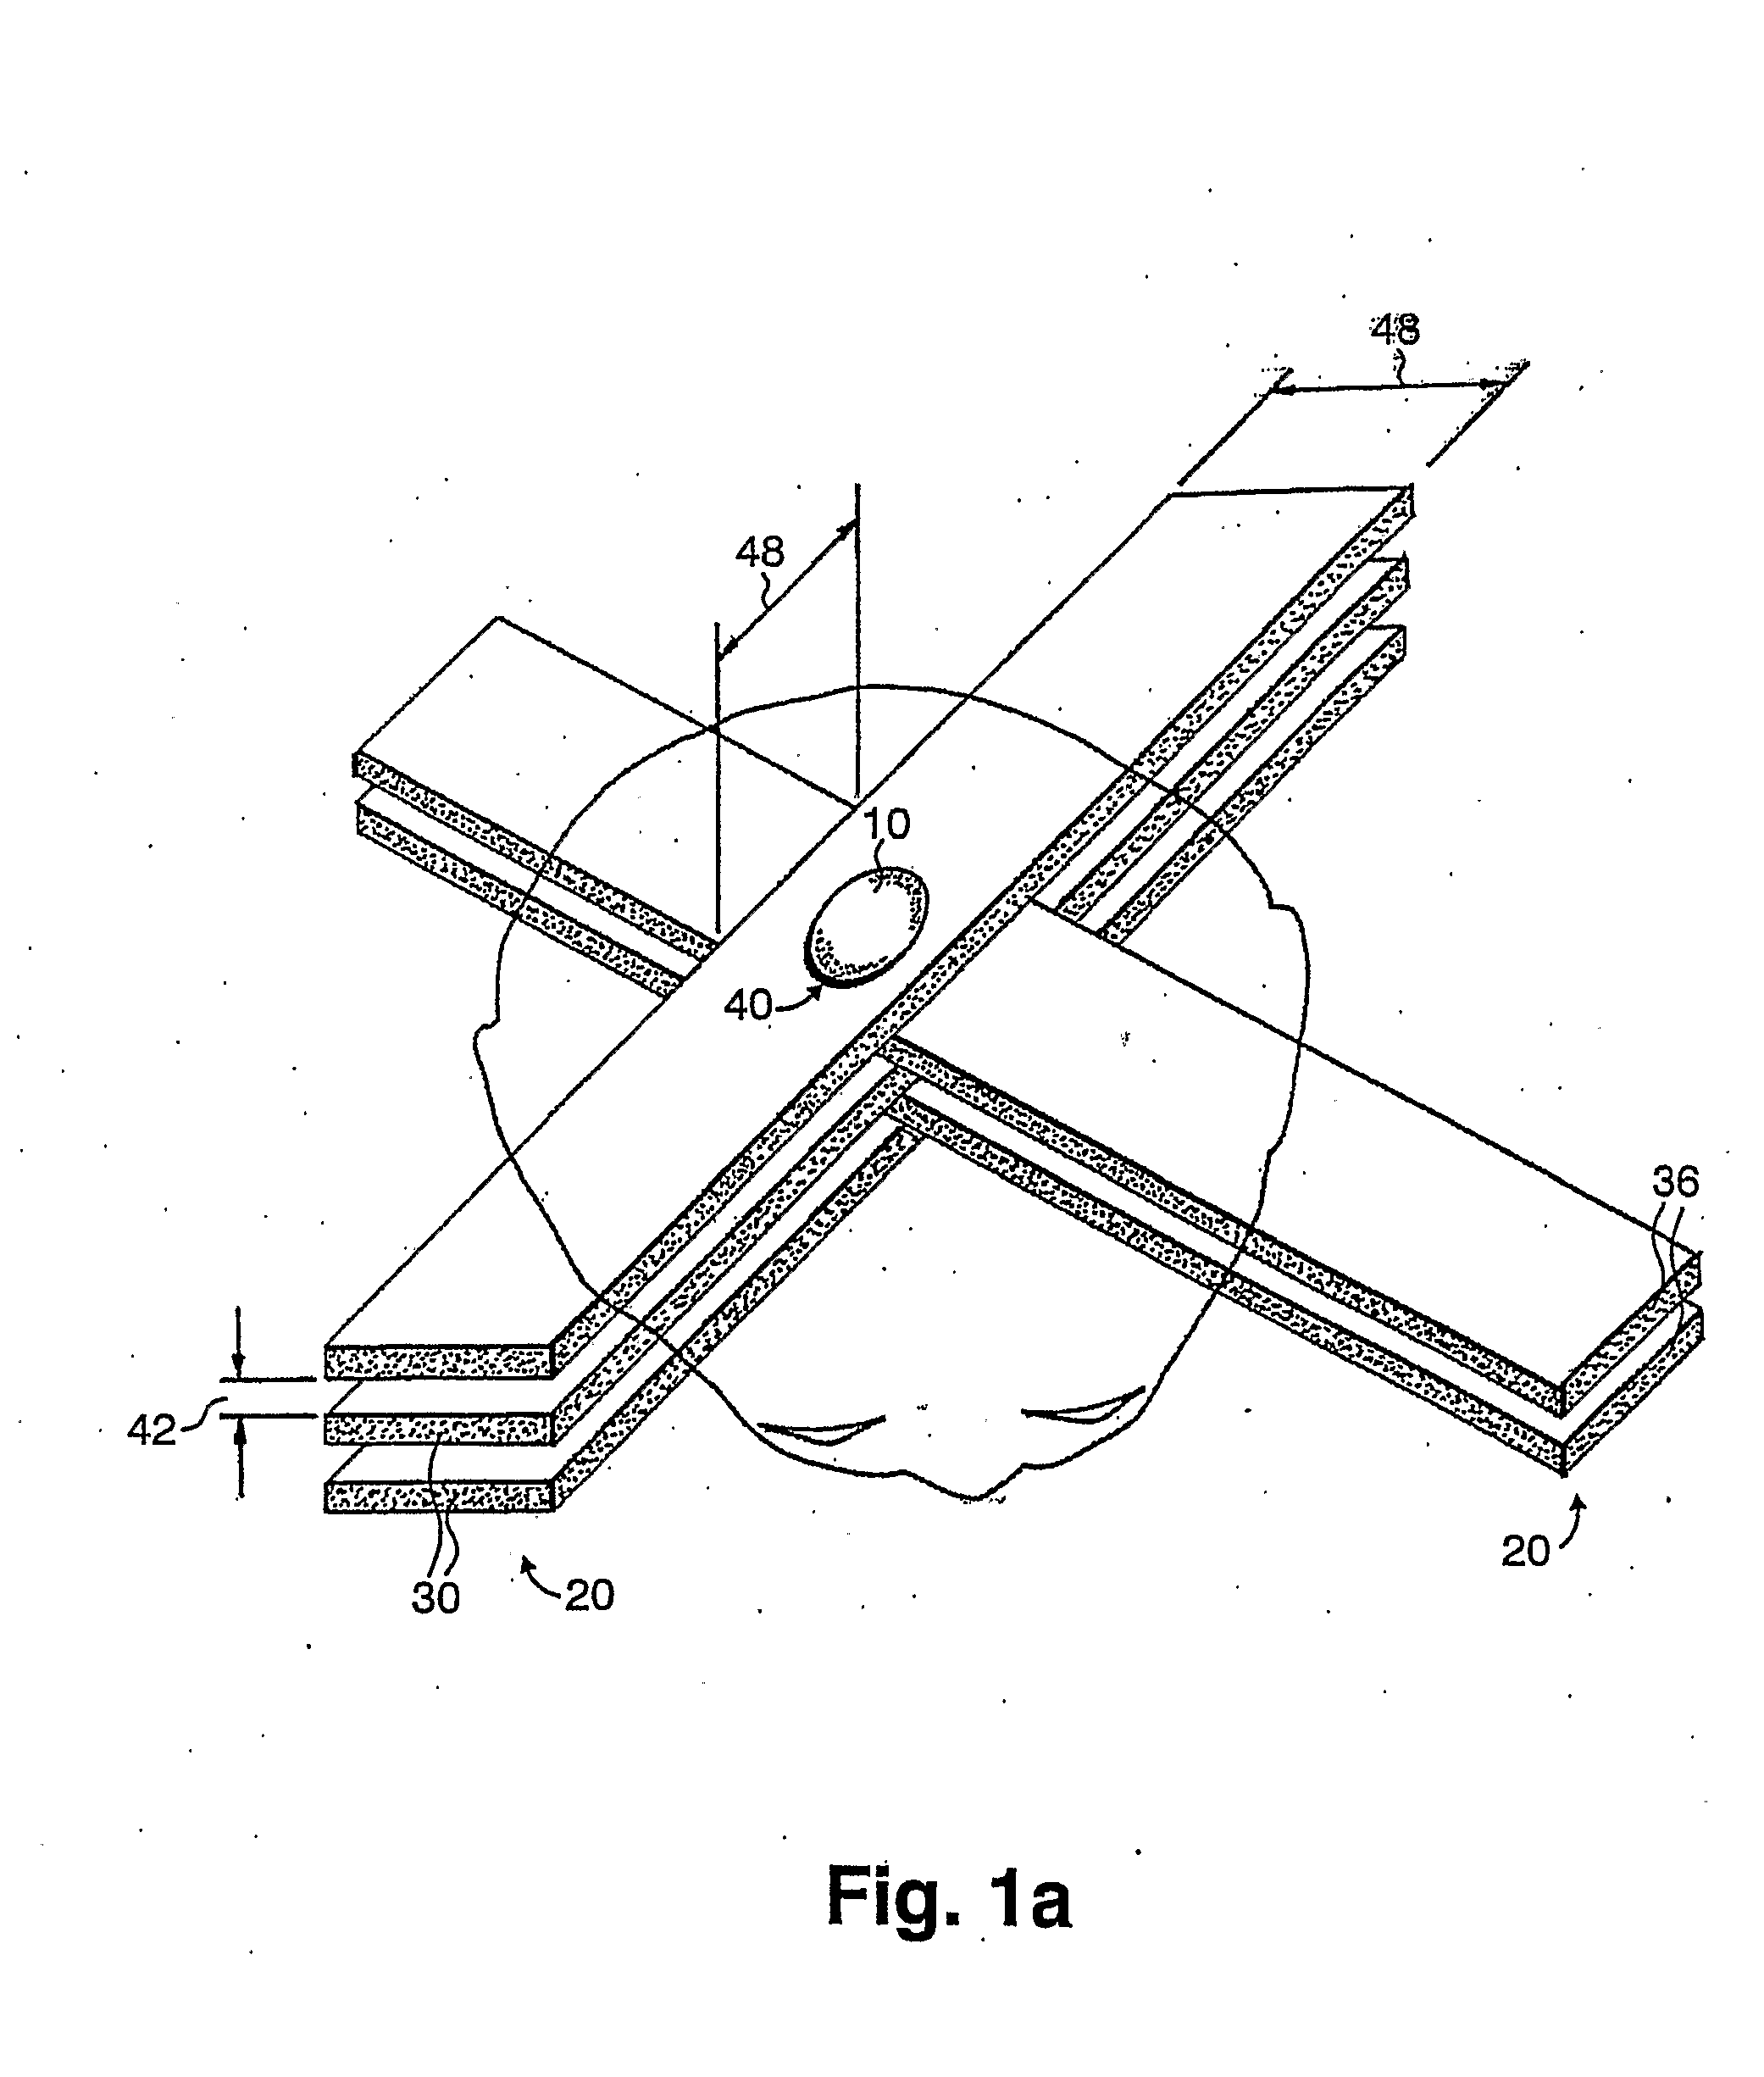 Methods for Implementing Microbeam Radiation Therapy